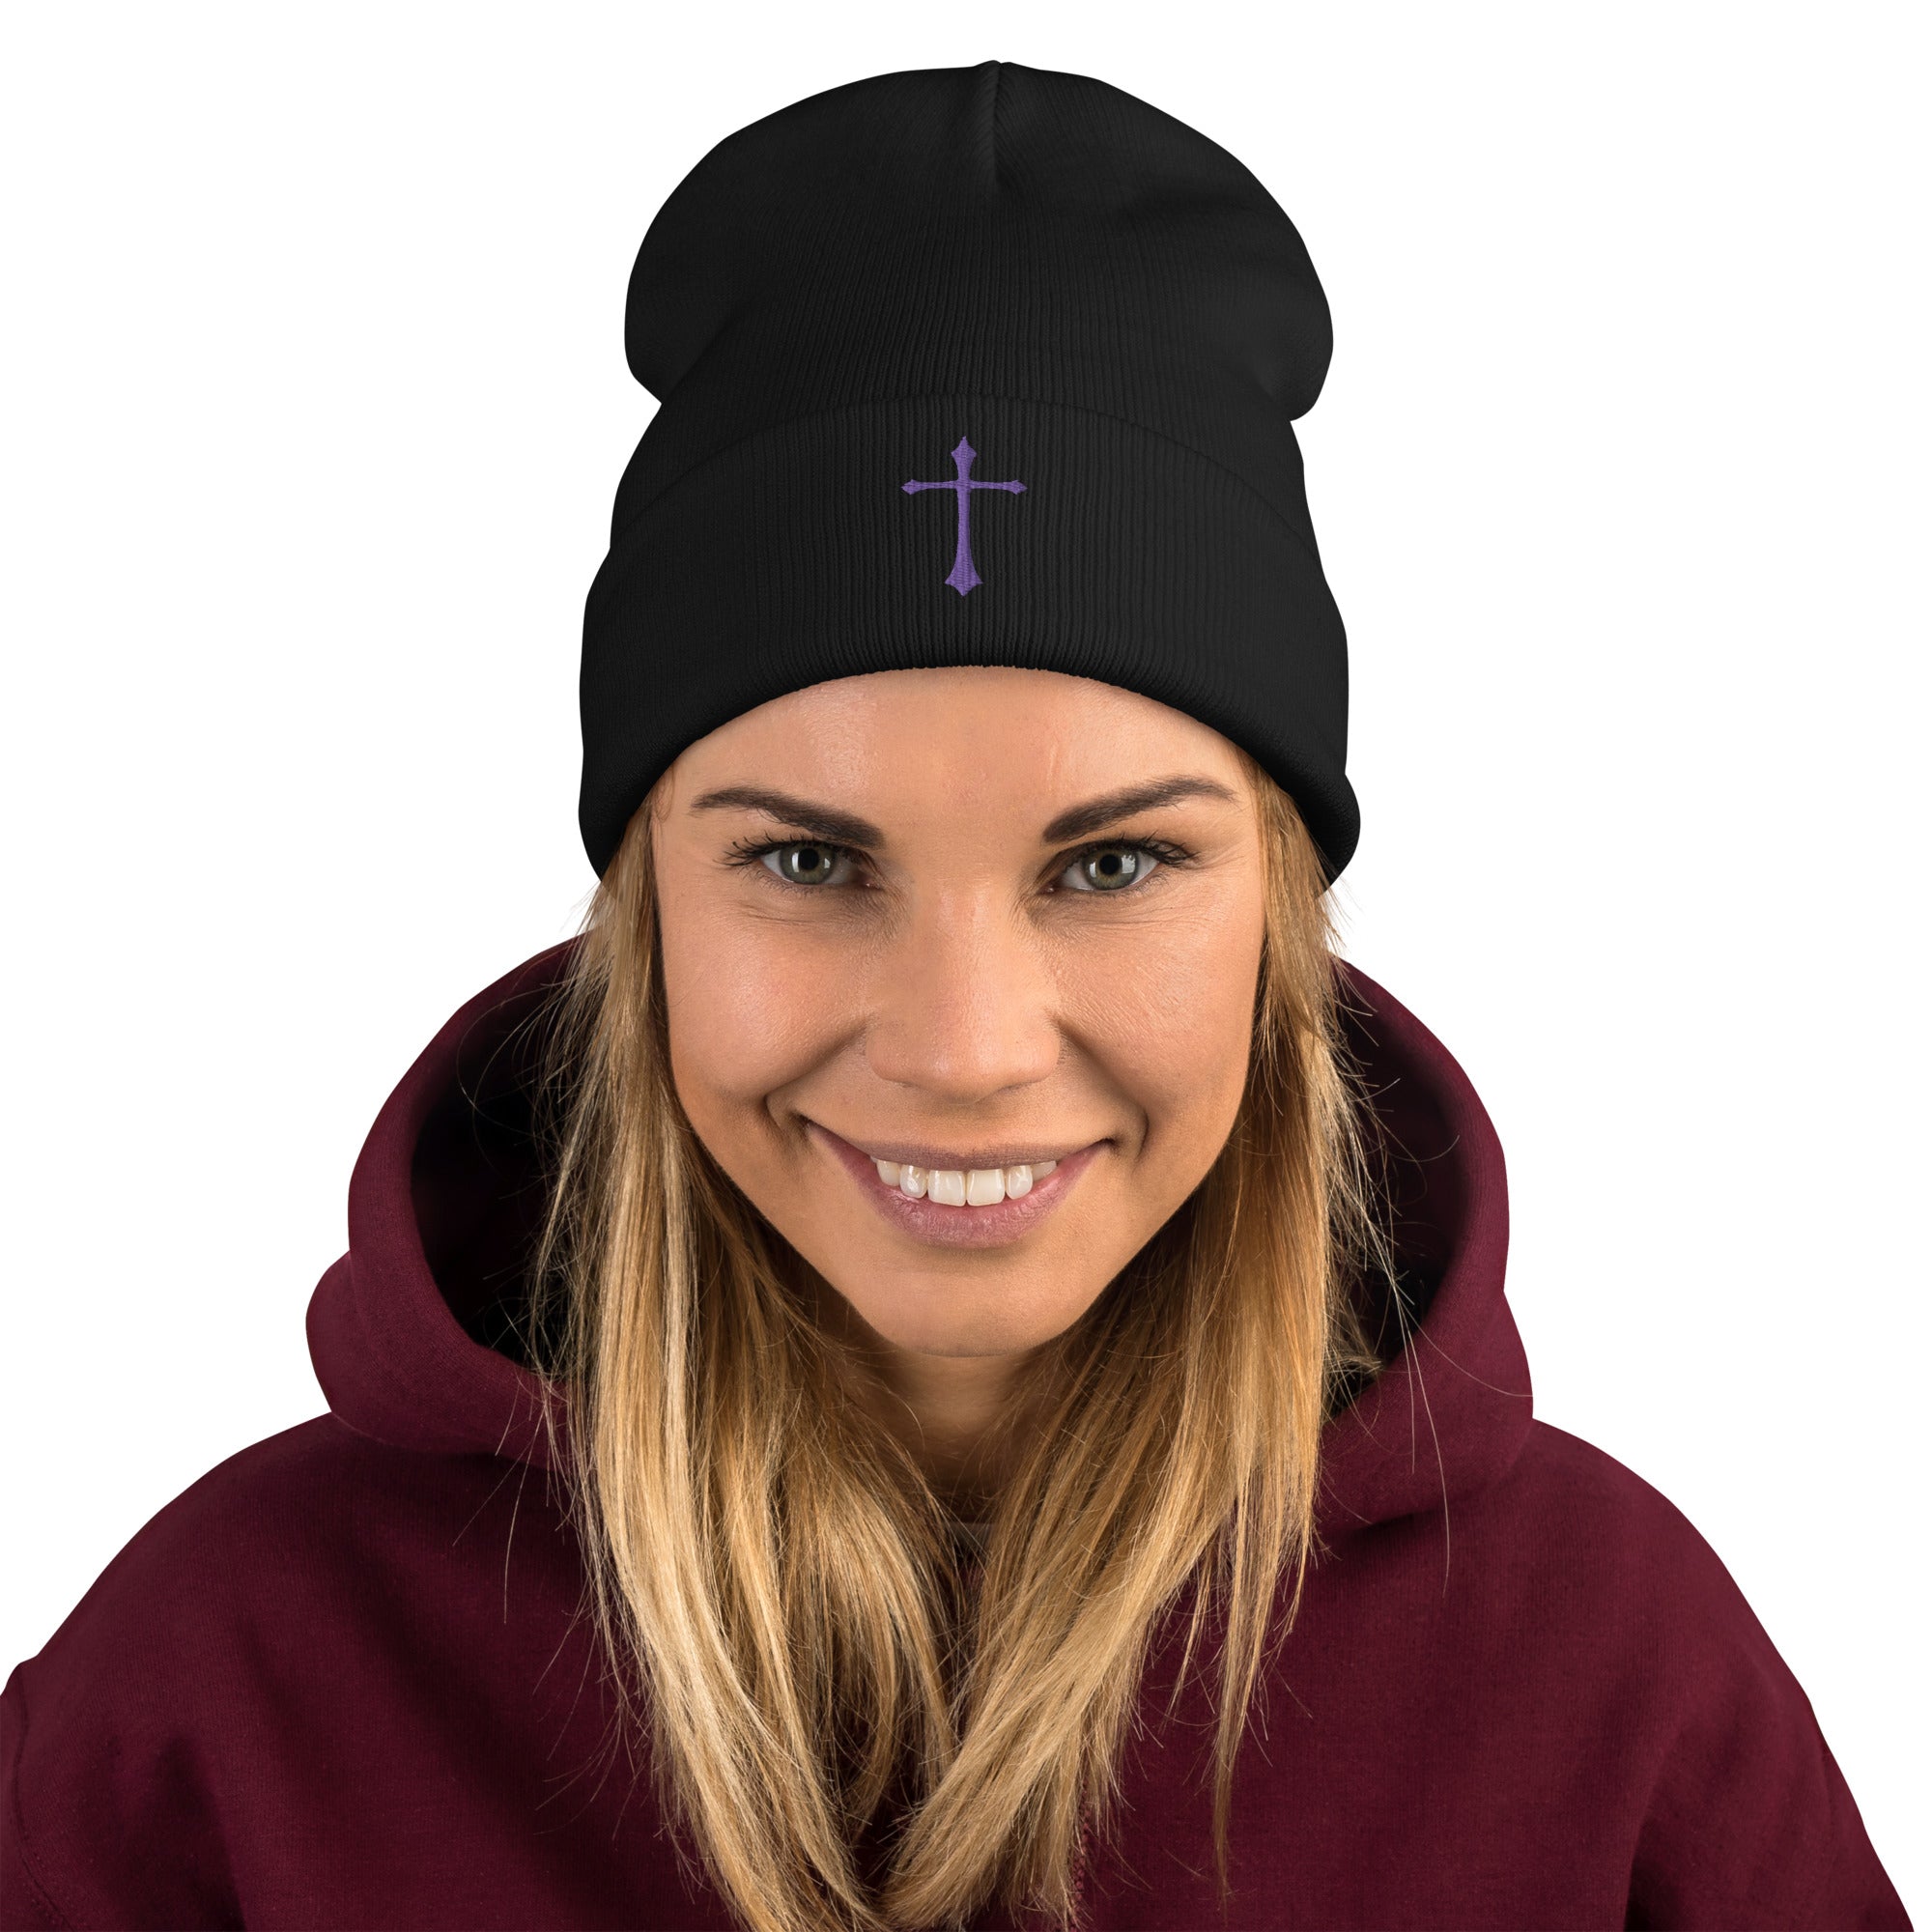 Purple Gothic Ancient Medeival Cross Embroidered Cuff Beanie - Edge of Life Designs